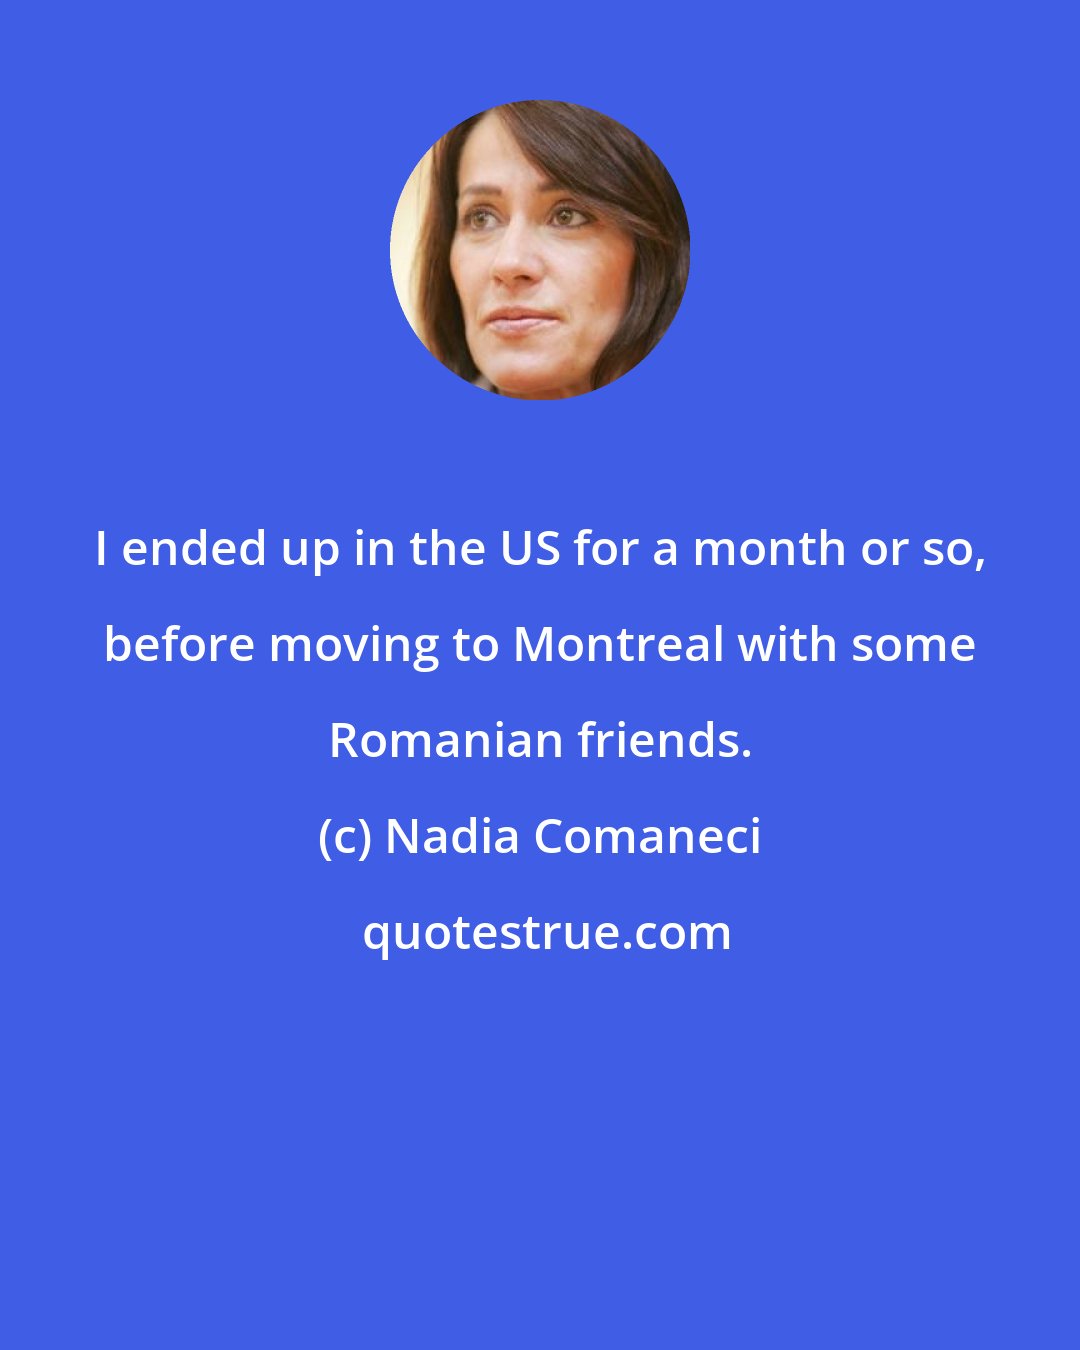 Nadia Comaneci: I ended up in the US for a month or so, before moving to Montreal with some Romanian friends.